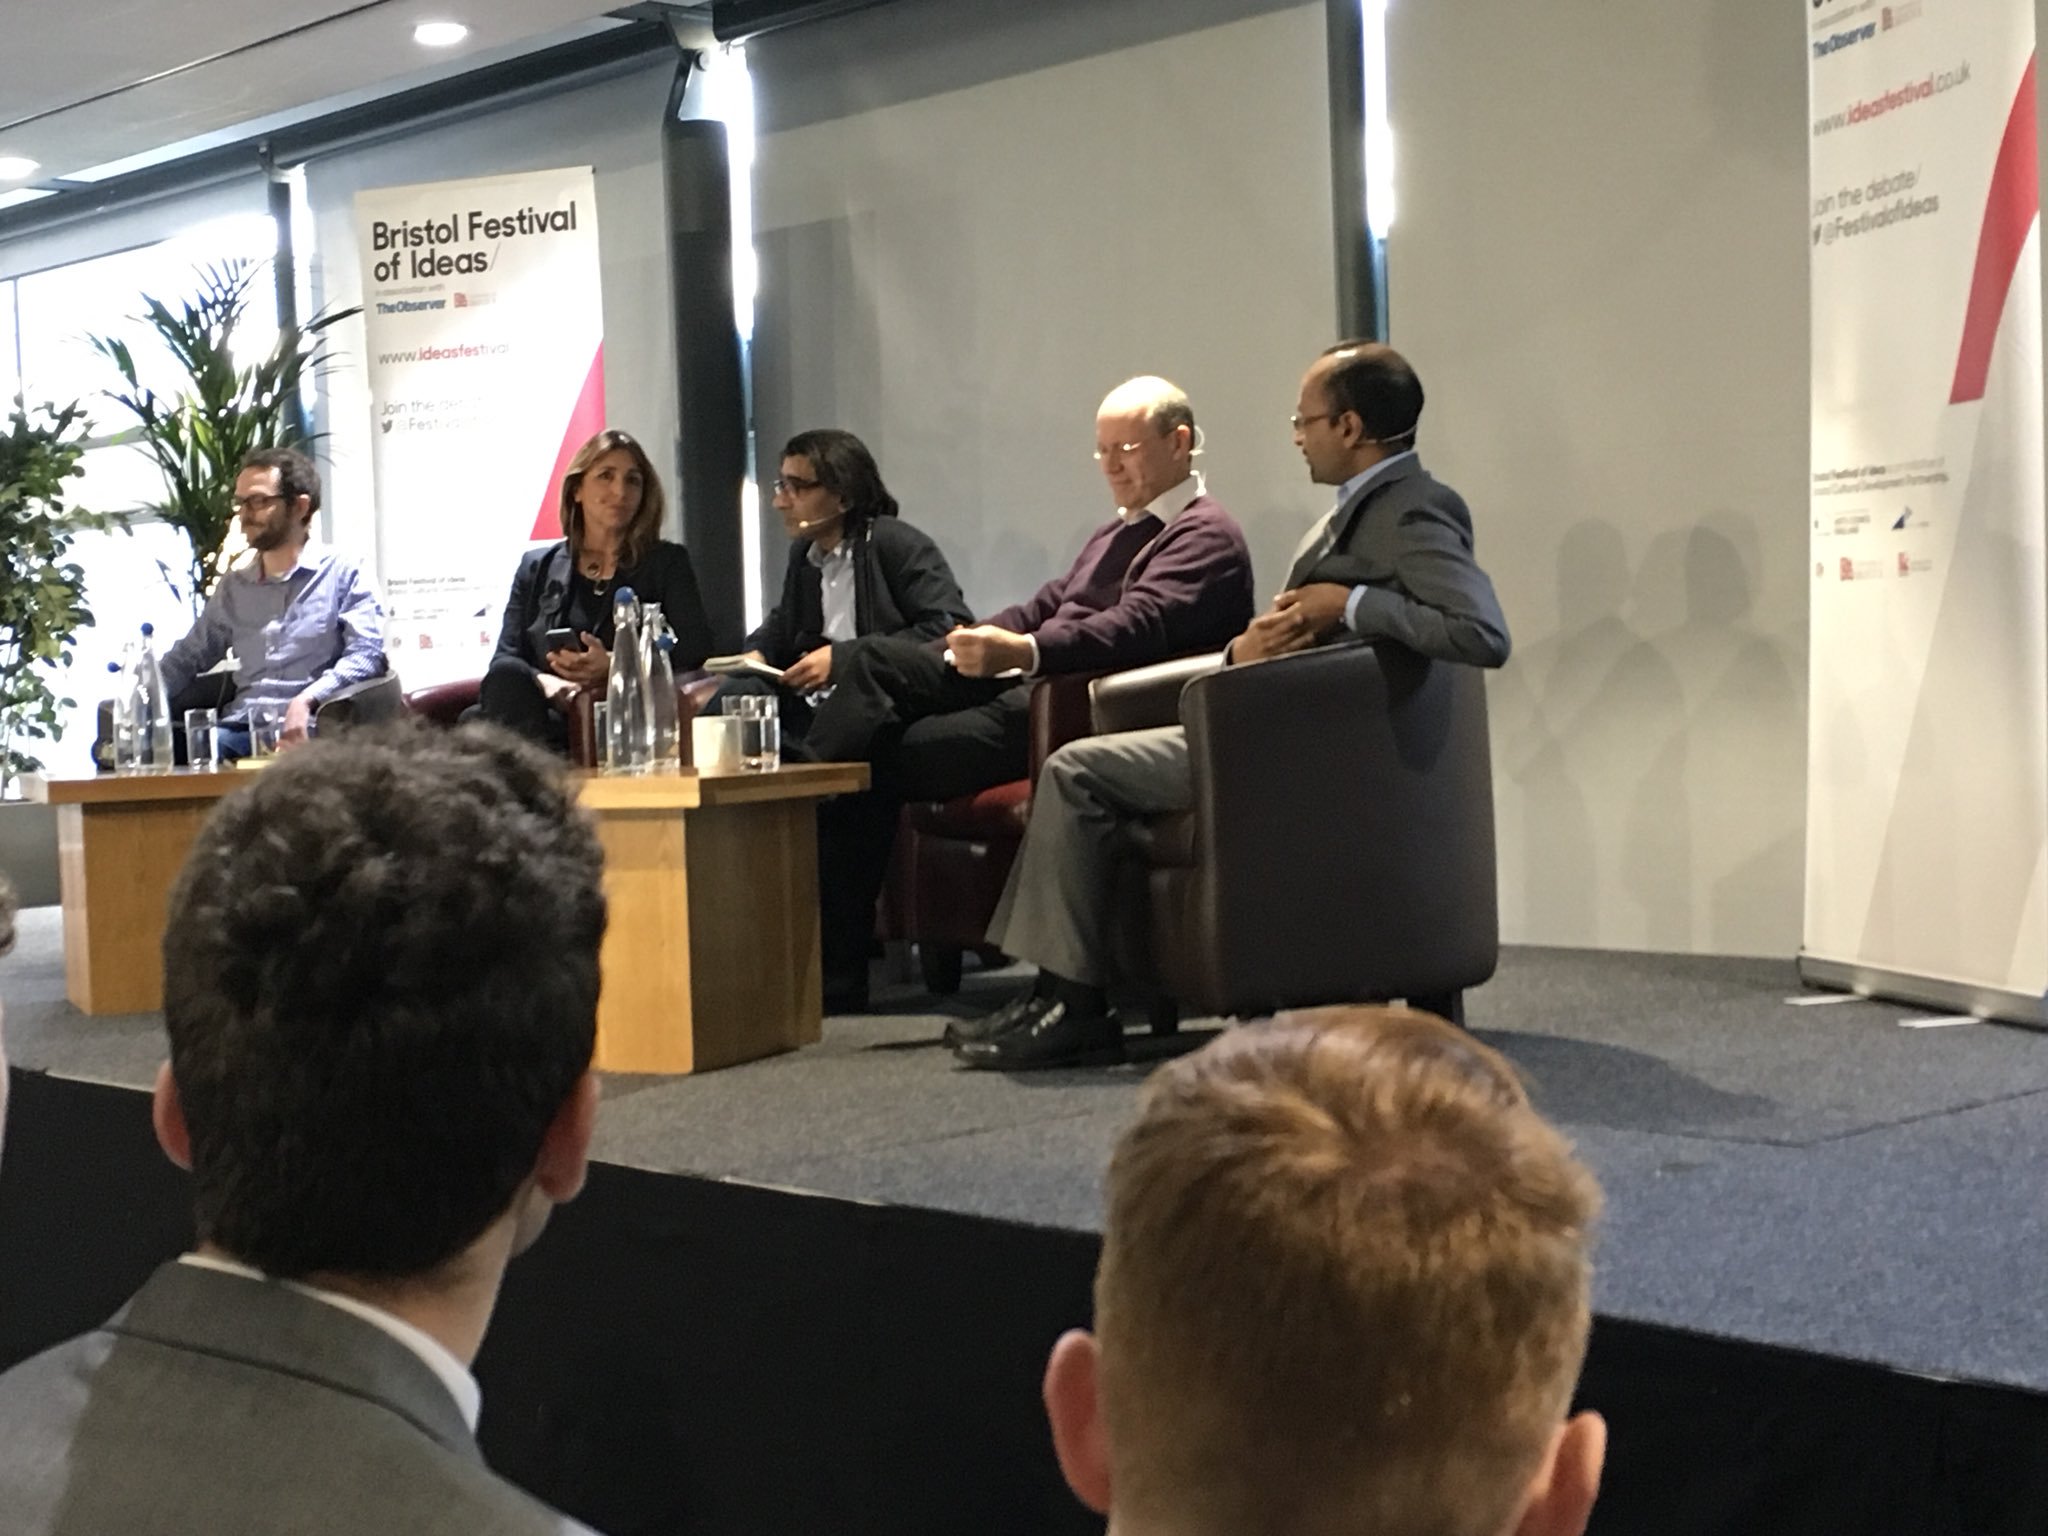 Great to be back at @FestivalofIdeas - @gloriaoriggi on the panel.  First UK copies of her @PrincetonUPress book ‘Reputation’ on sale here. https://t.co/e5QycH4oxX